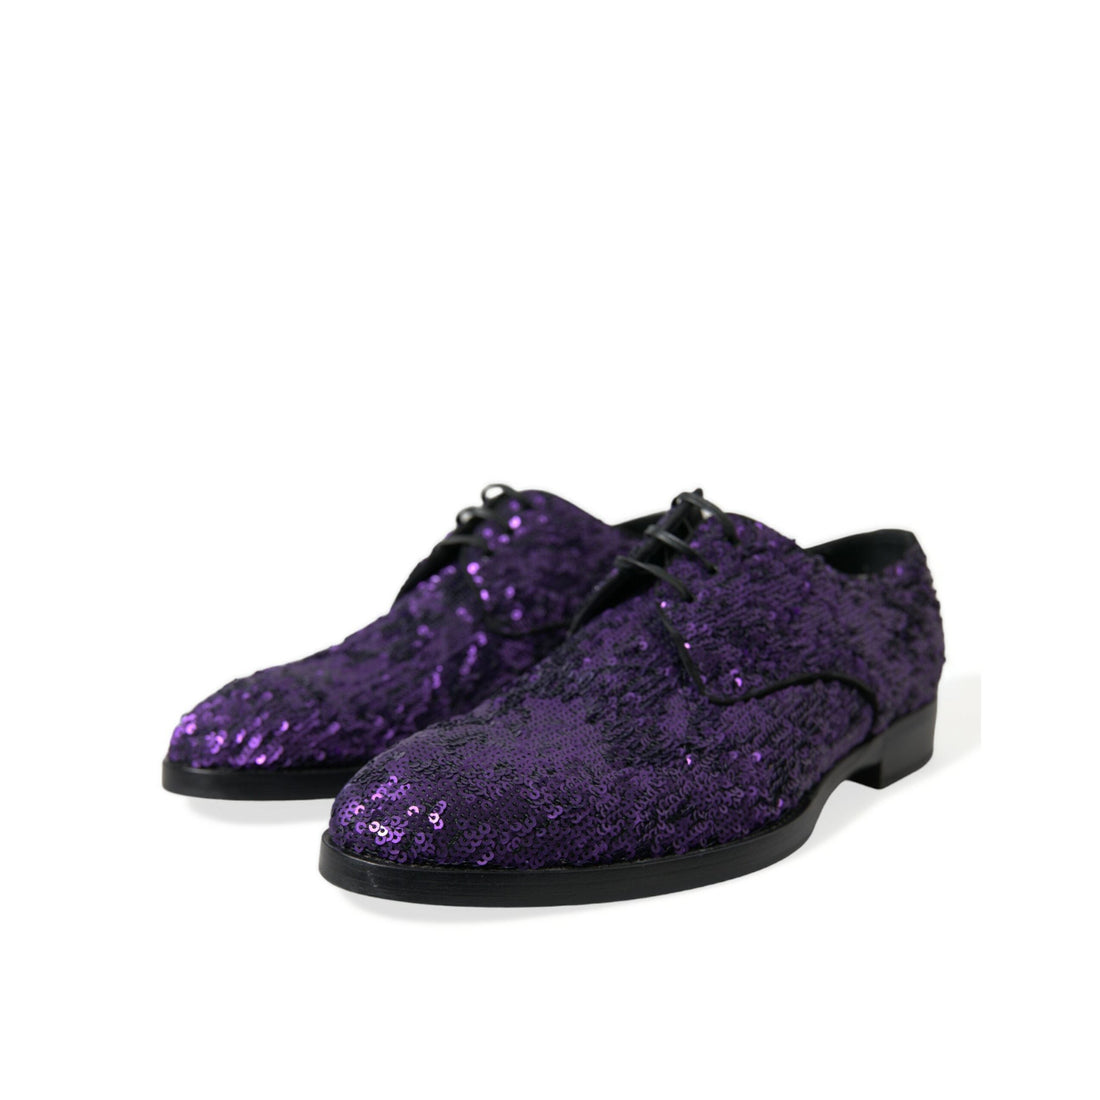 Dolce & Gabbana Purple Sequined Lace Up Oxford Dress Shoes